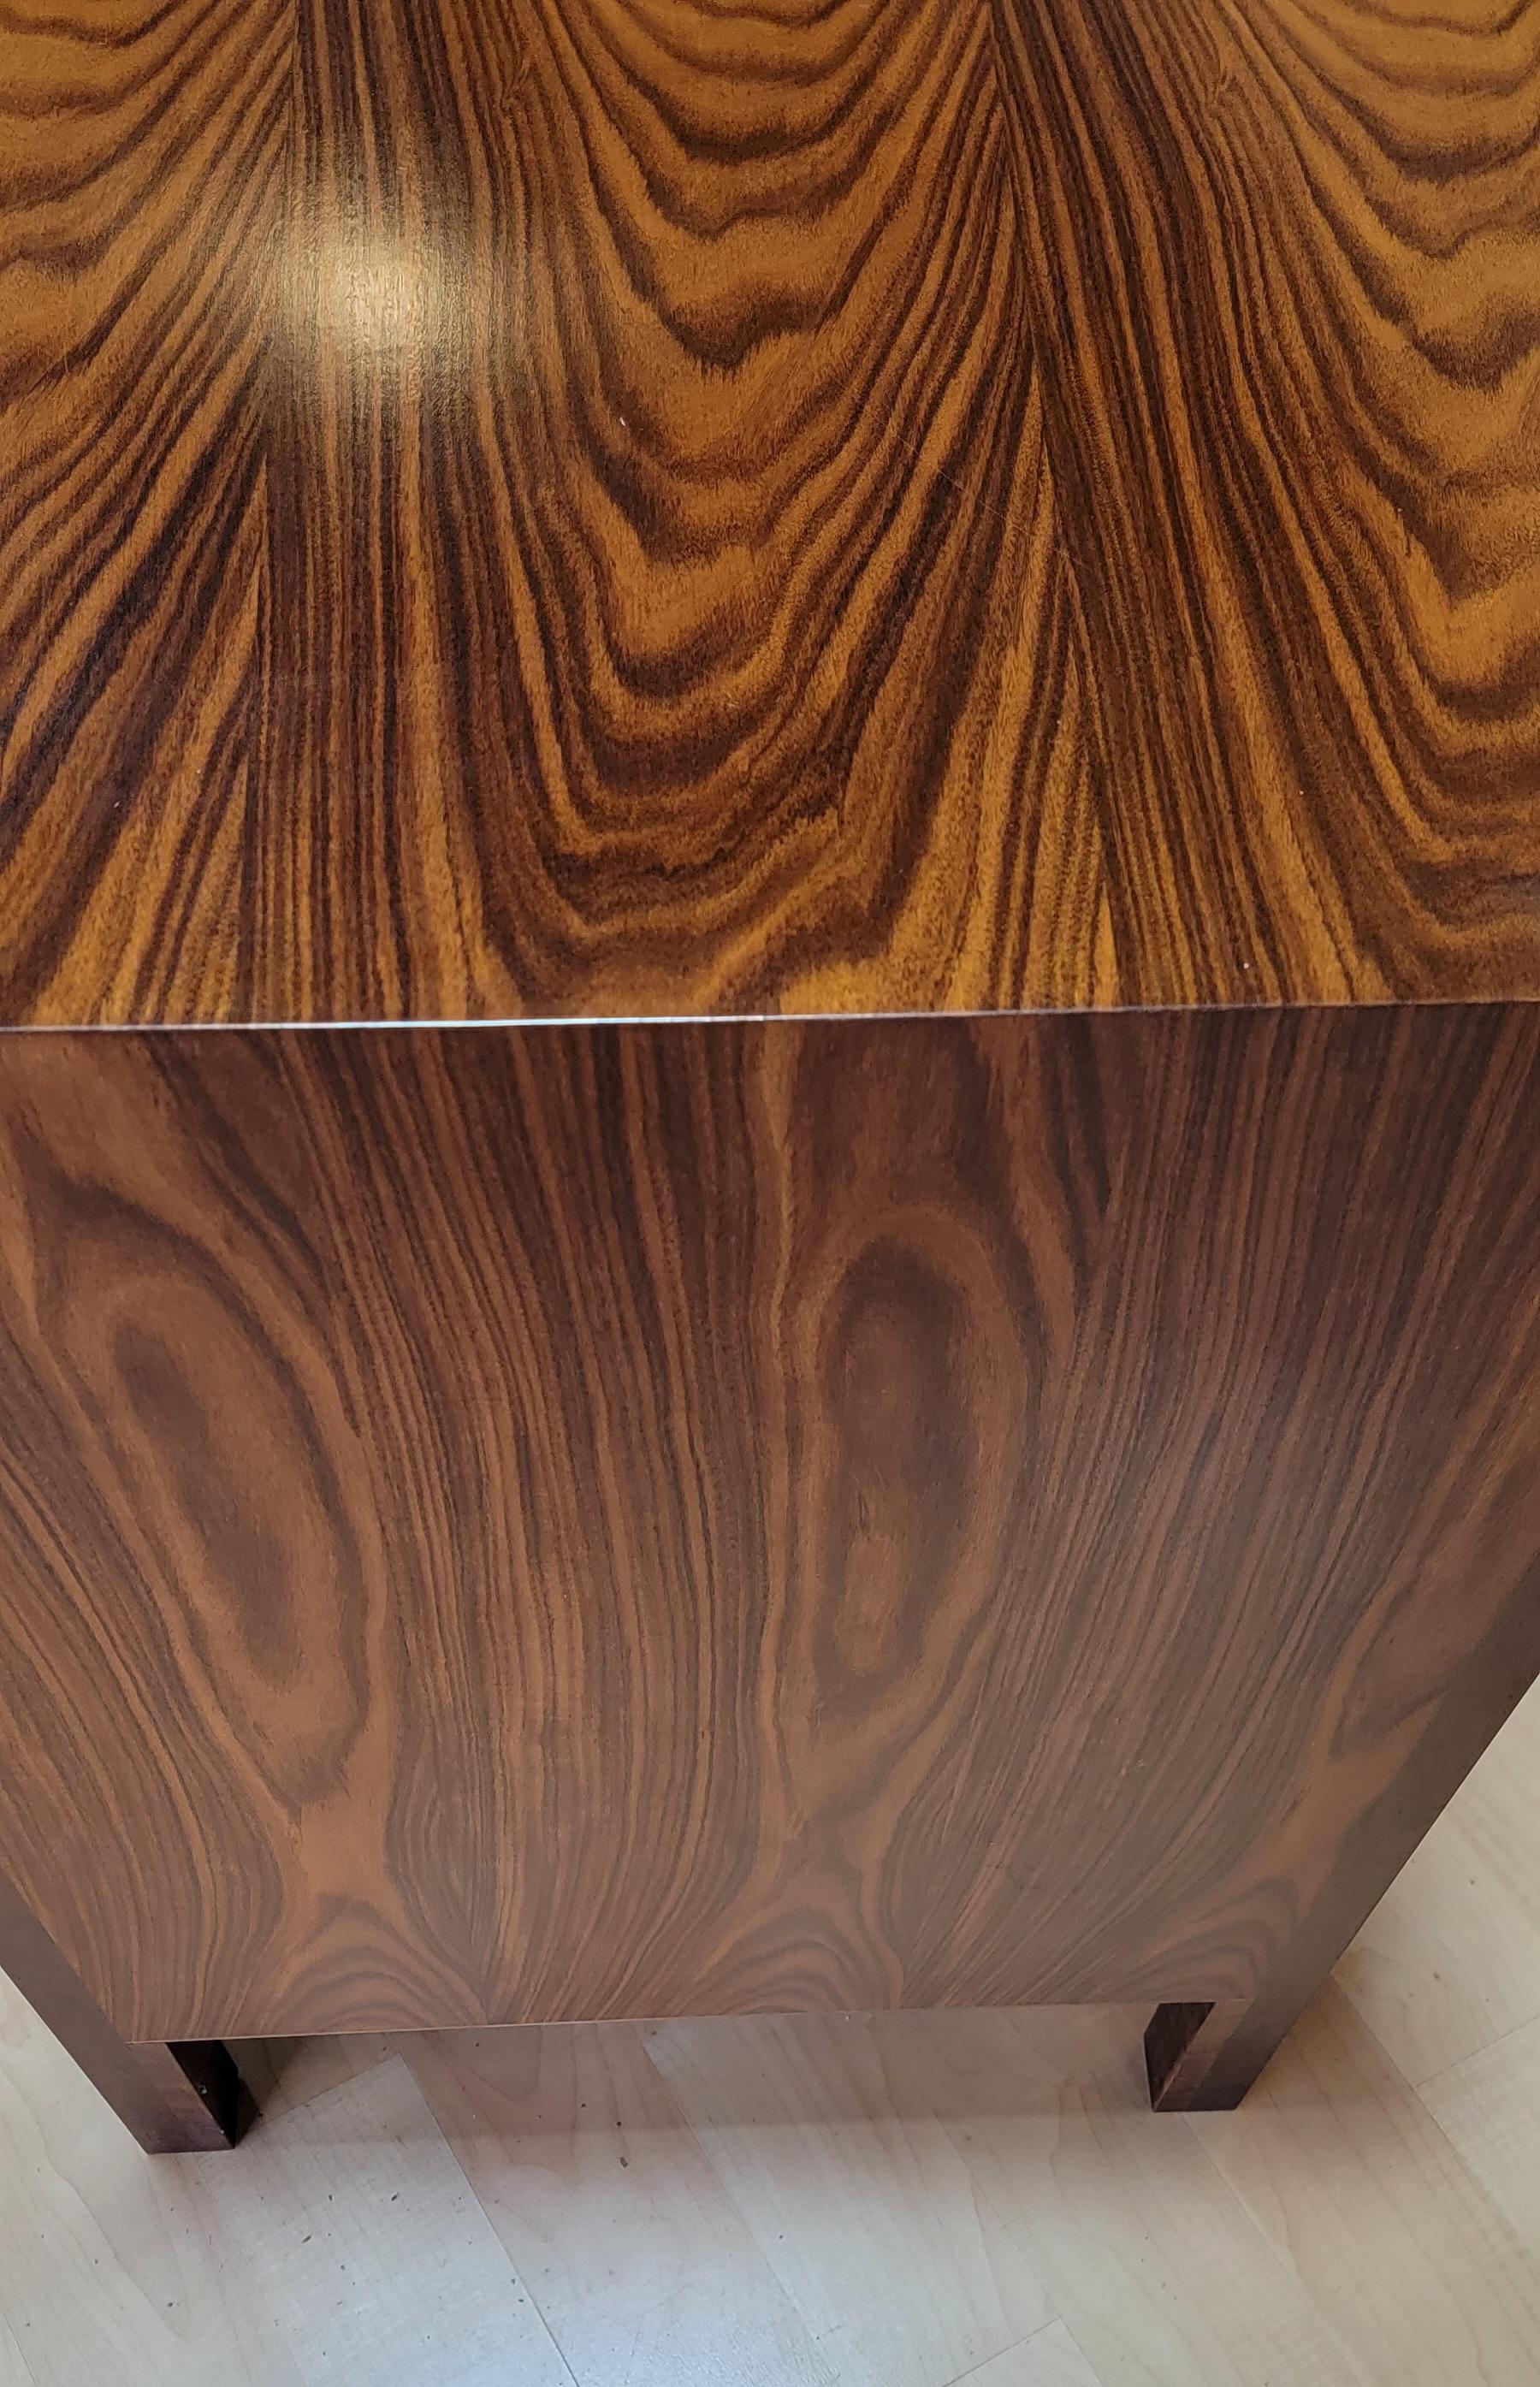 Exceptional wood grain pattern to this very attractive long low, 6 drawer rosewood dresser. Measuring just under 79 inches wide. Original finish glows with a rich, deep patina. Dovetail construction to drawers. 